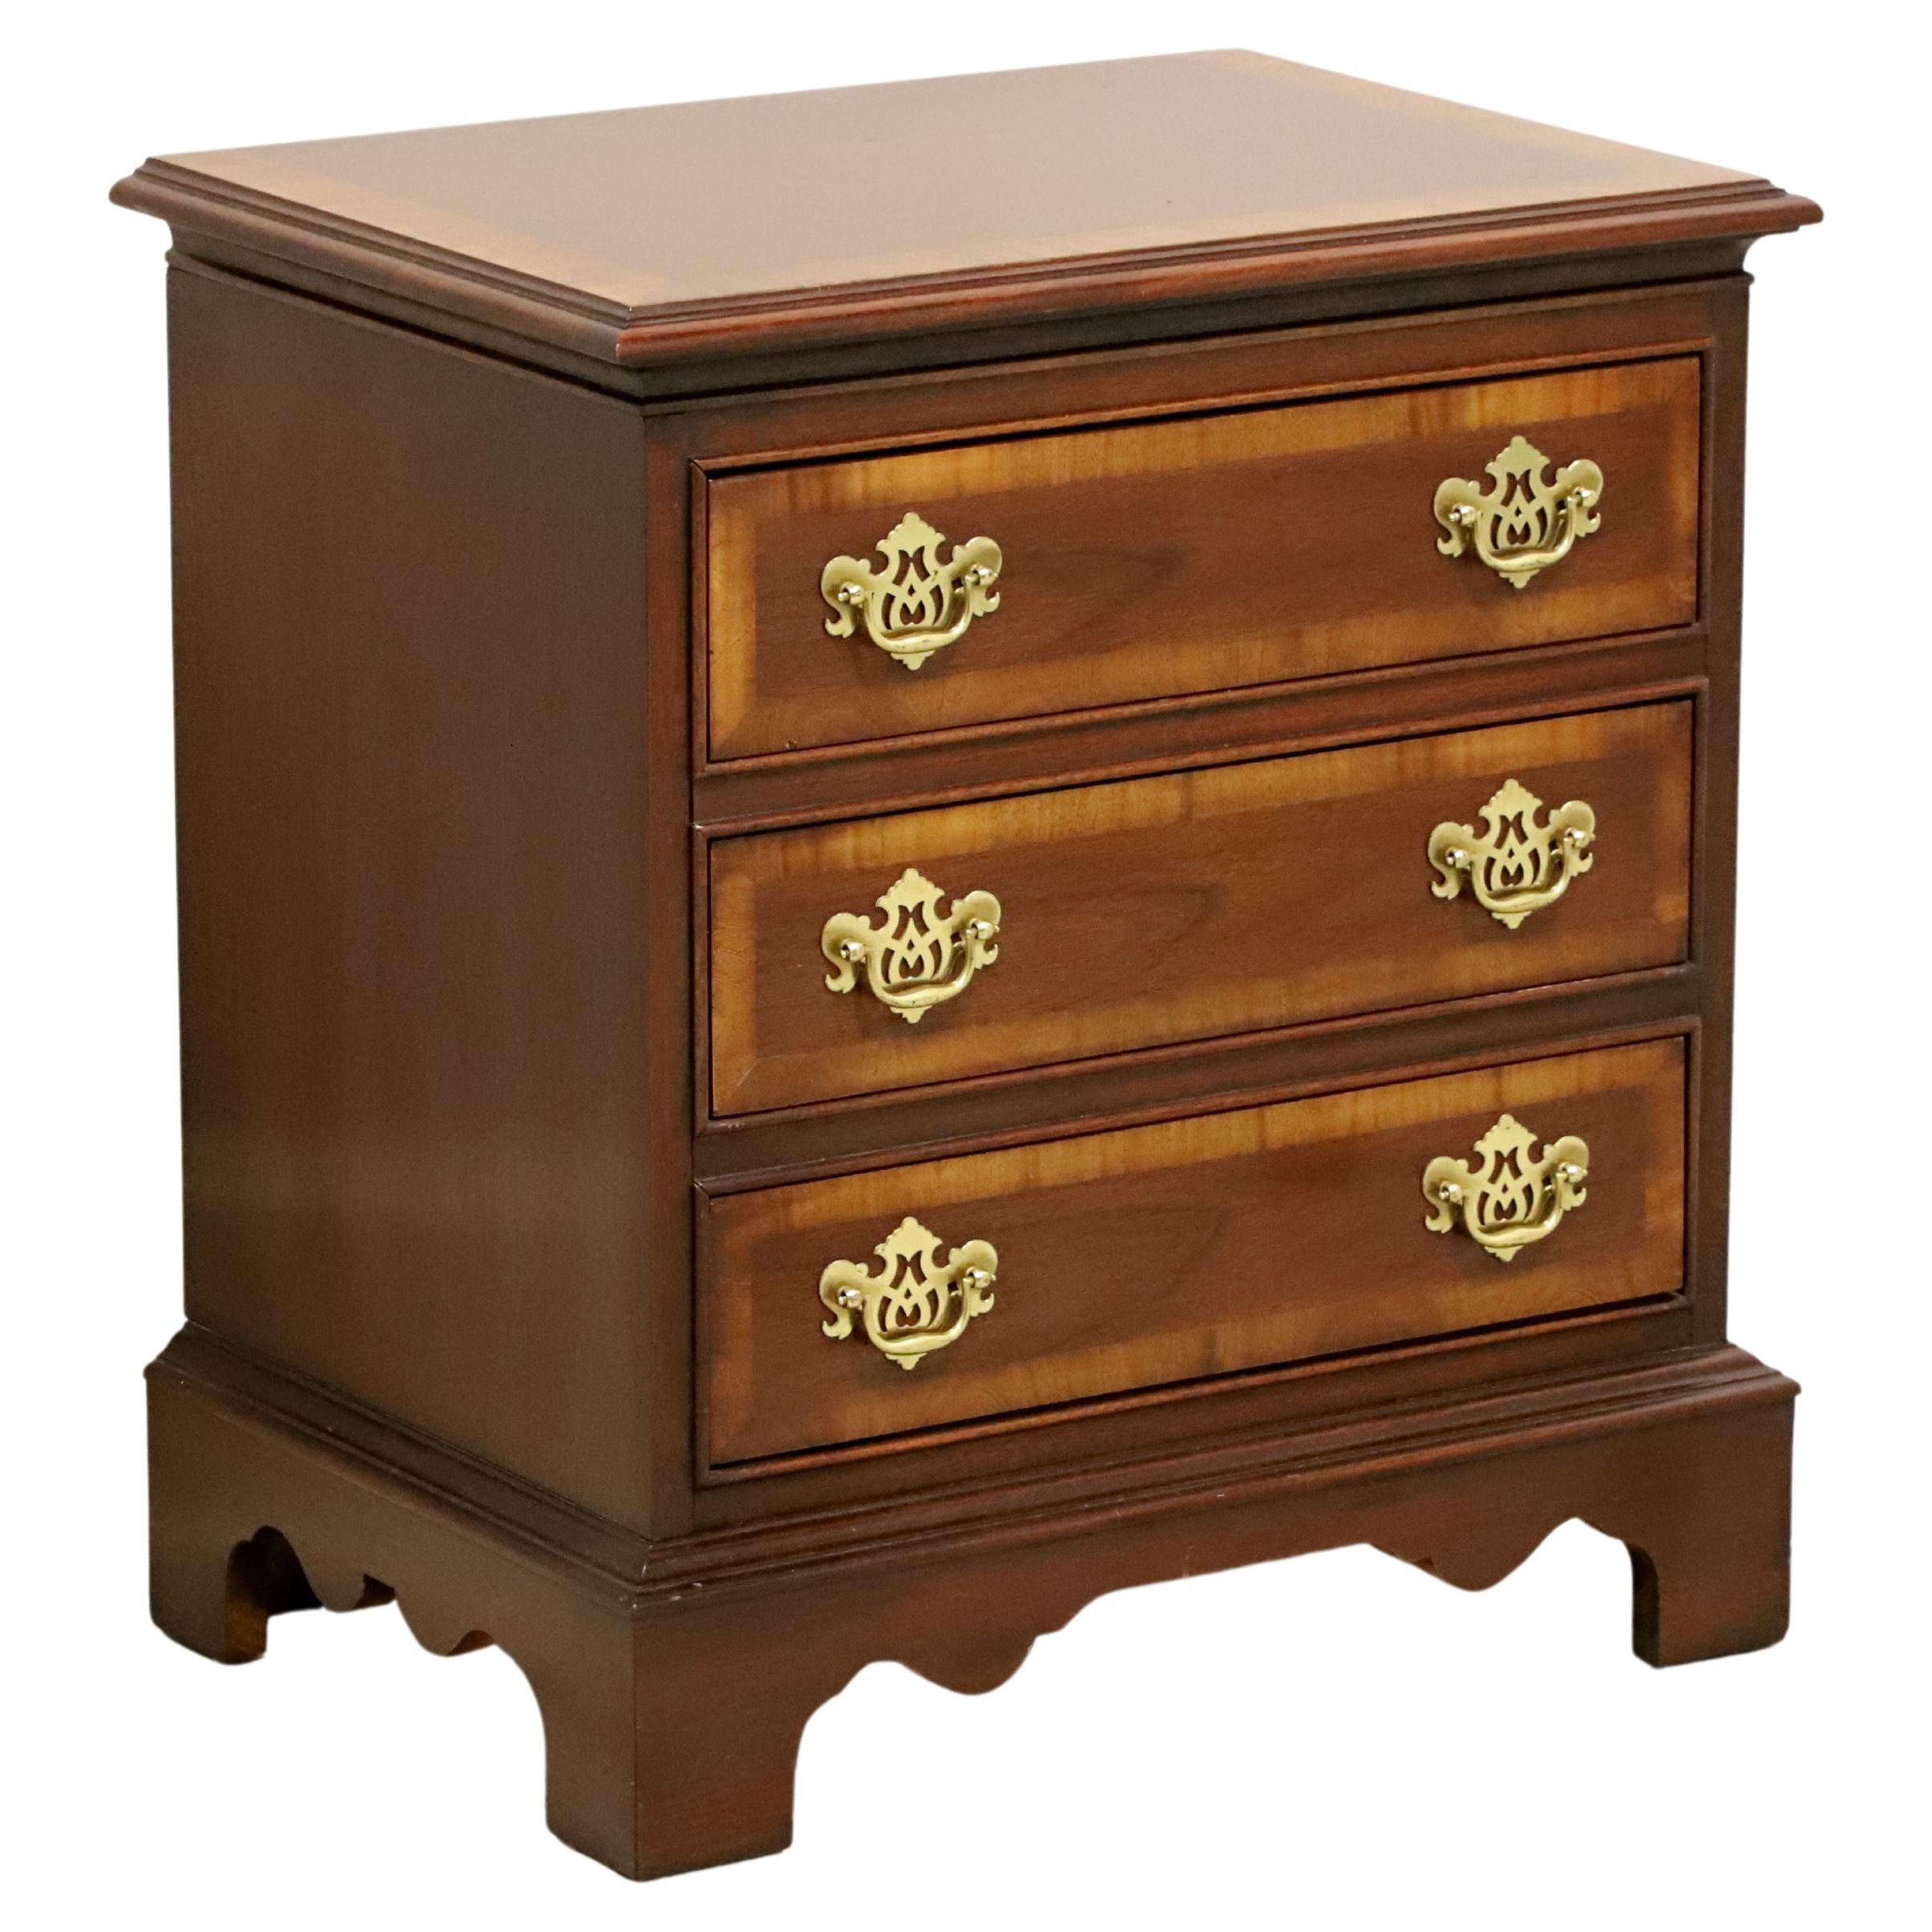 DIXIE Banded Mahogany Chippendale Nightstand Bedside Chest For Sale